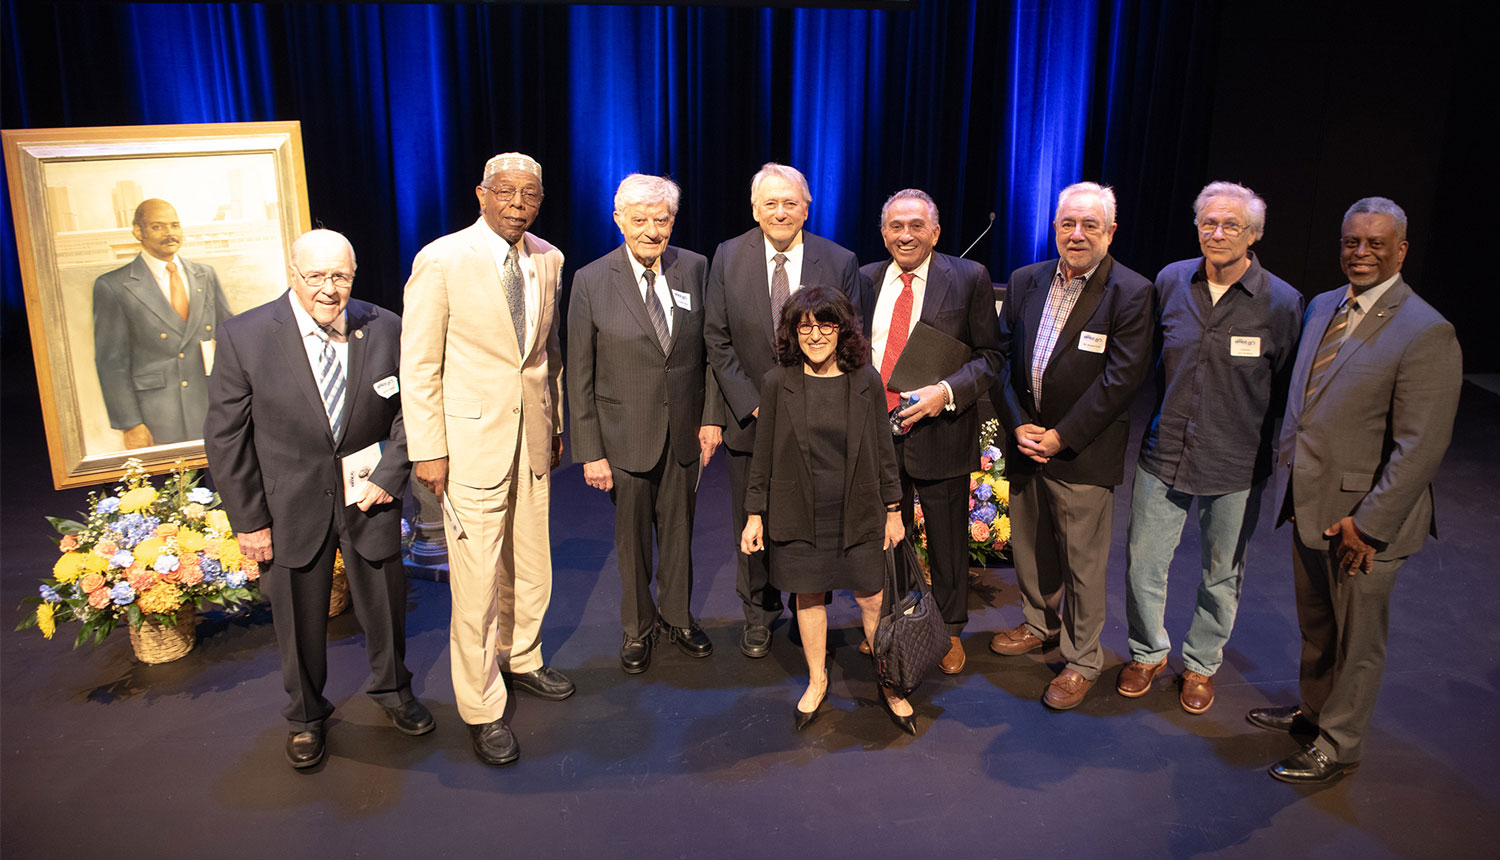 President Munroe (R) with former administrators and current faculty who worked closely with Dr. Smith during his BMCC tenure.